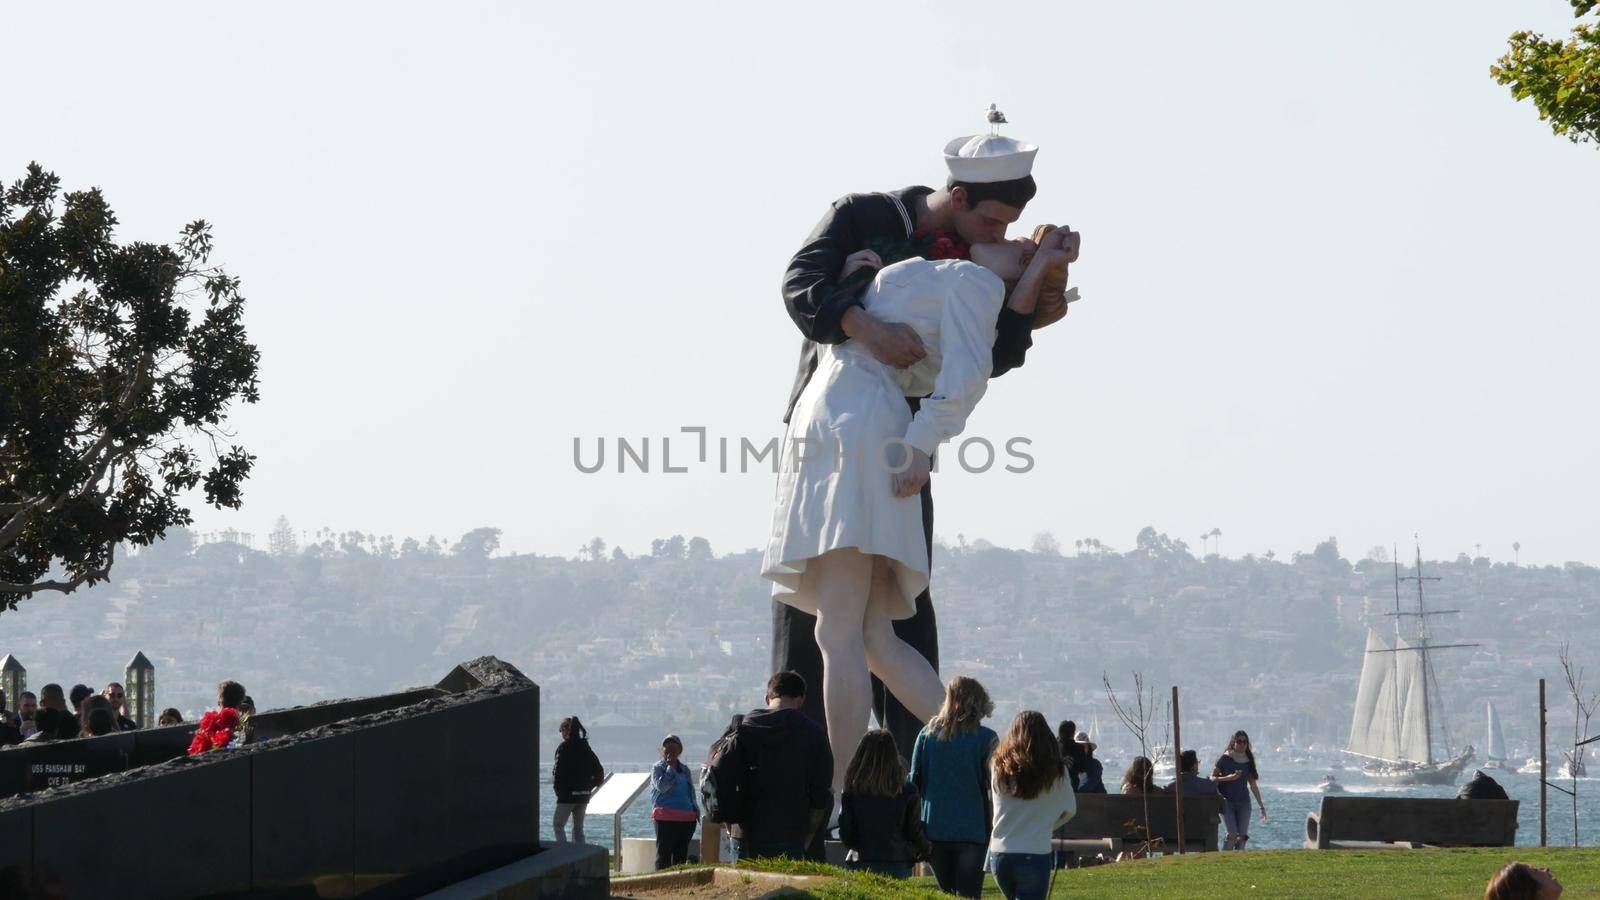 SAN DIEGO, CALIFORNIA USA - 23 FEB 2020: Unconditional Surrender Statue, USS Midway Museum. Symbol of navy fleet and Victory over Japan Day. Sailor kissing a woman, World War II memorial sculpture by DogoraSun